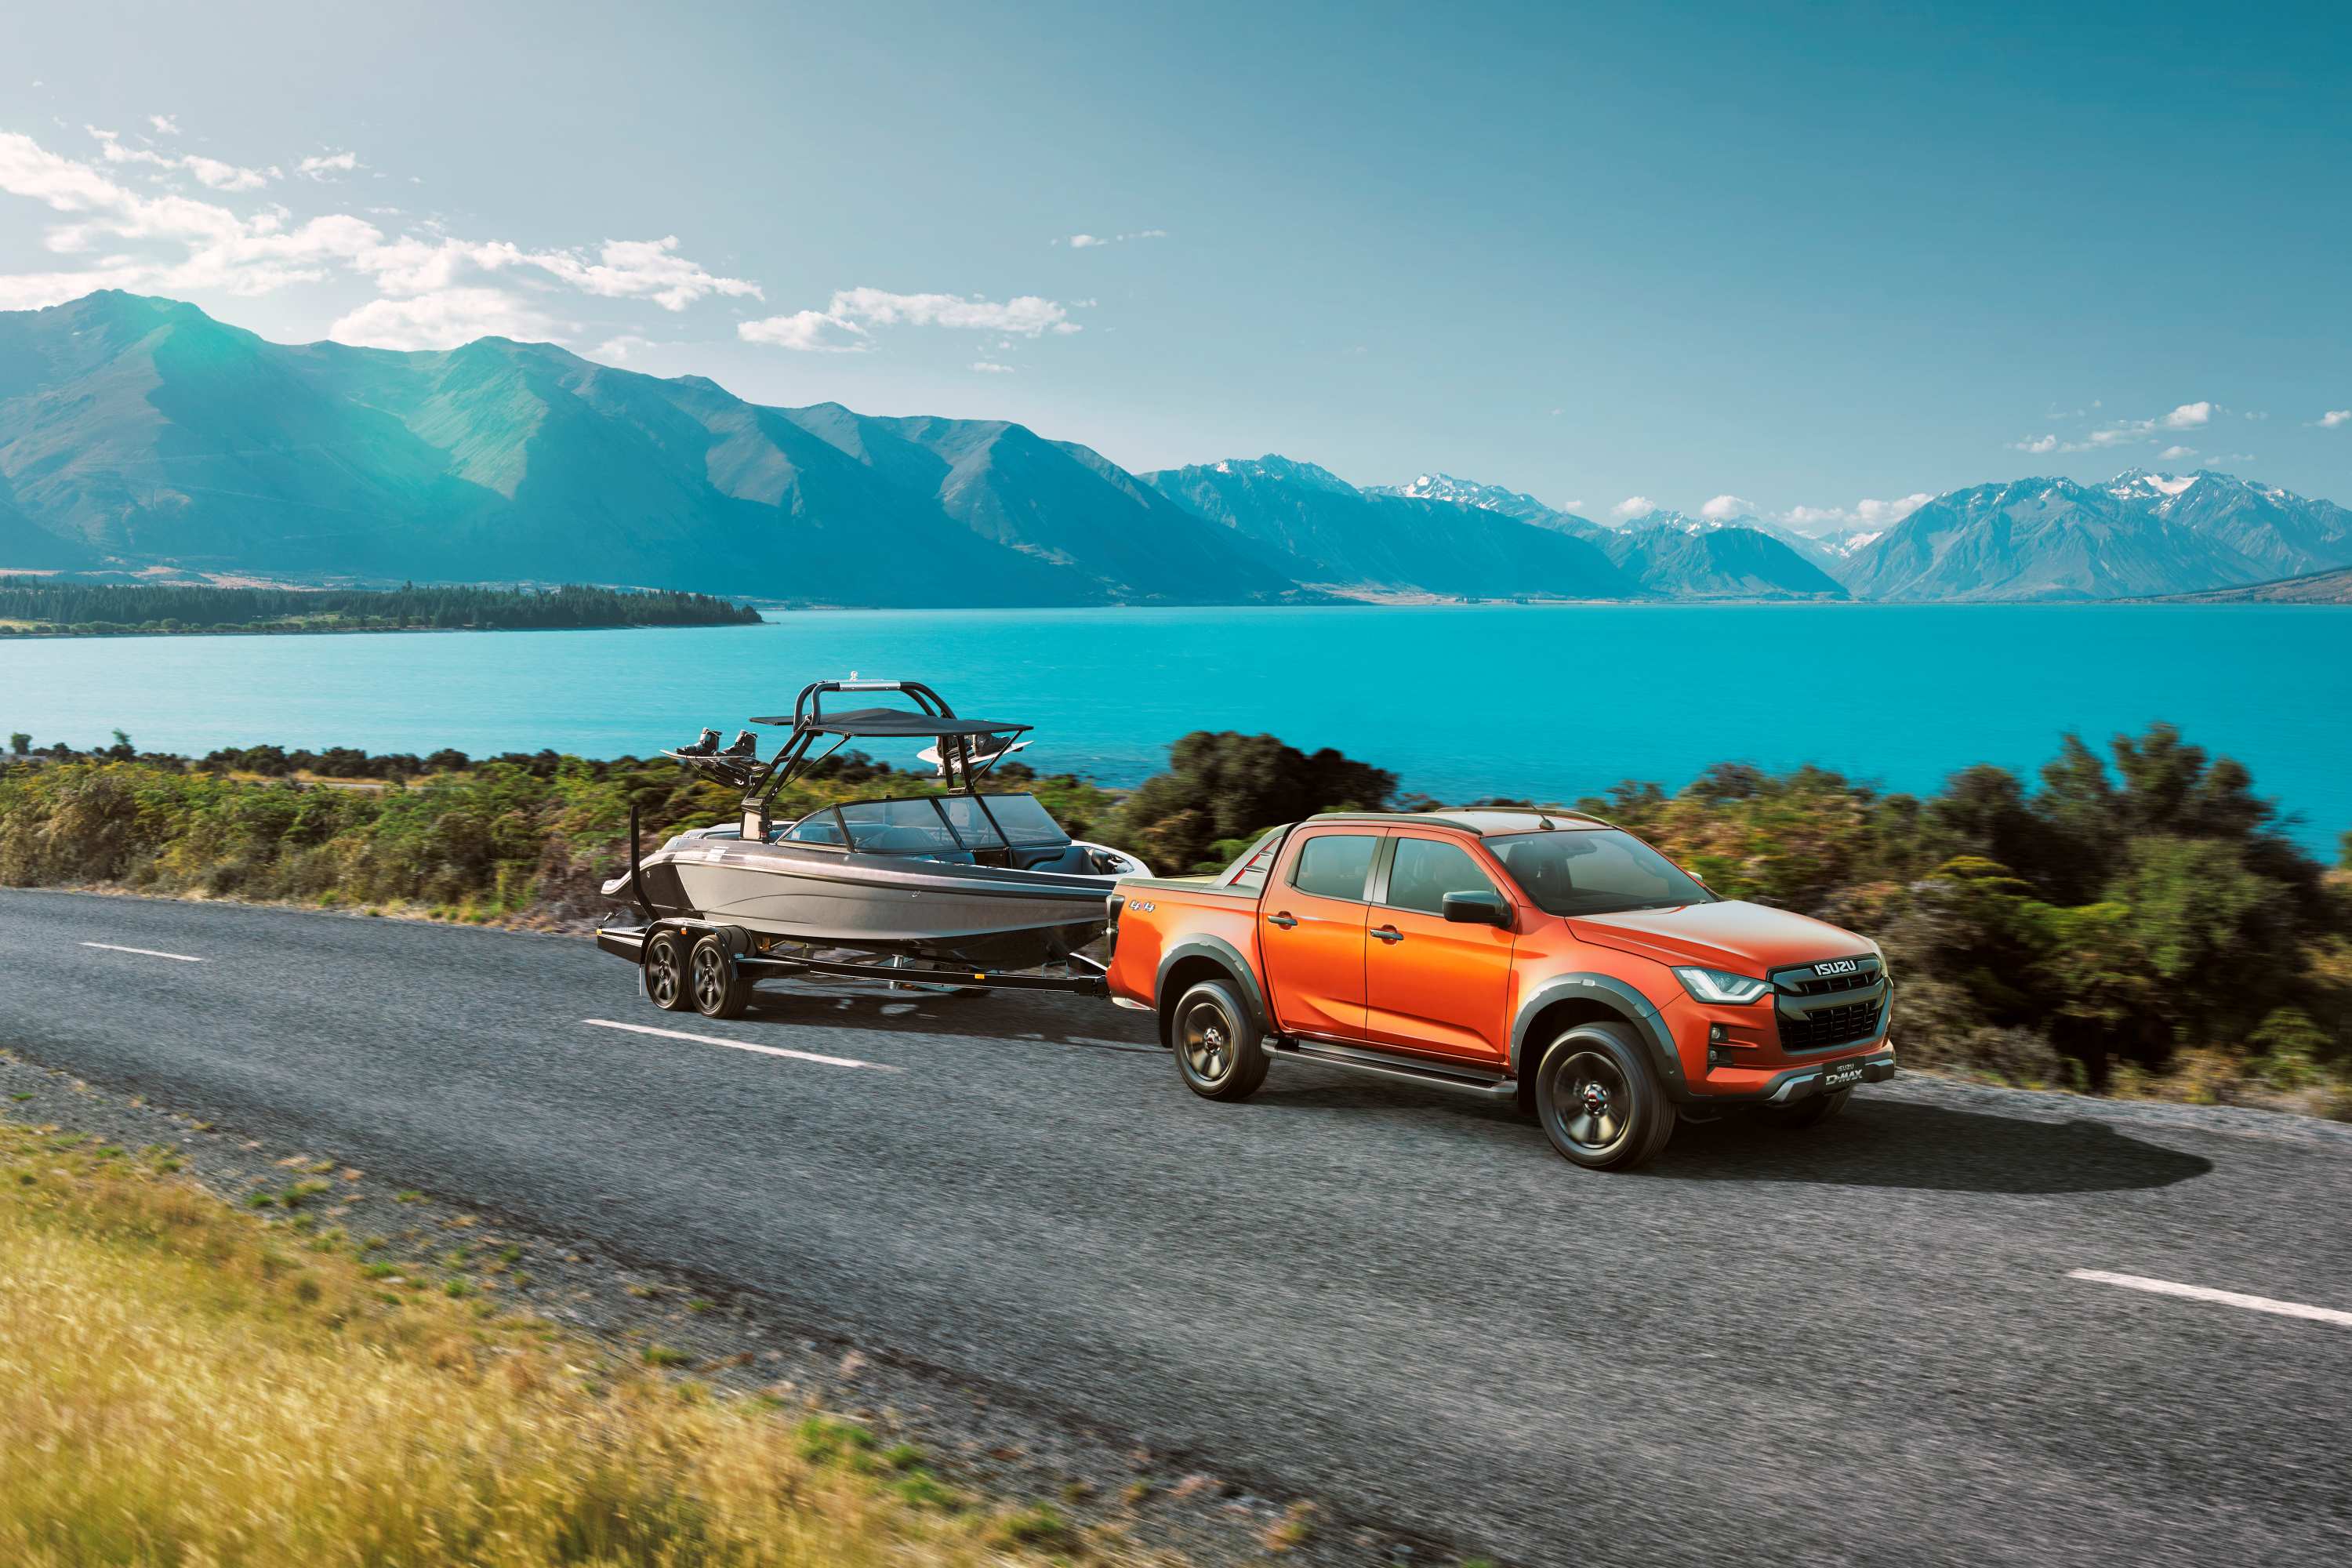 Isuzu D-MAX 21MY Towing the Line with Boat 4x4 X-TERRAIN Volcanic Amber